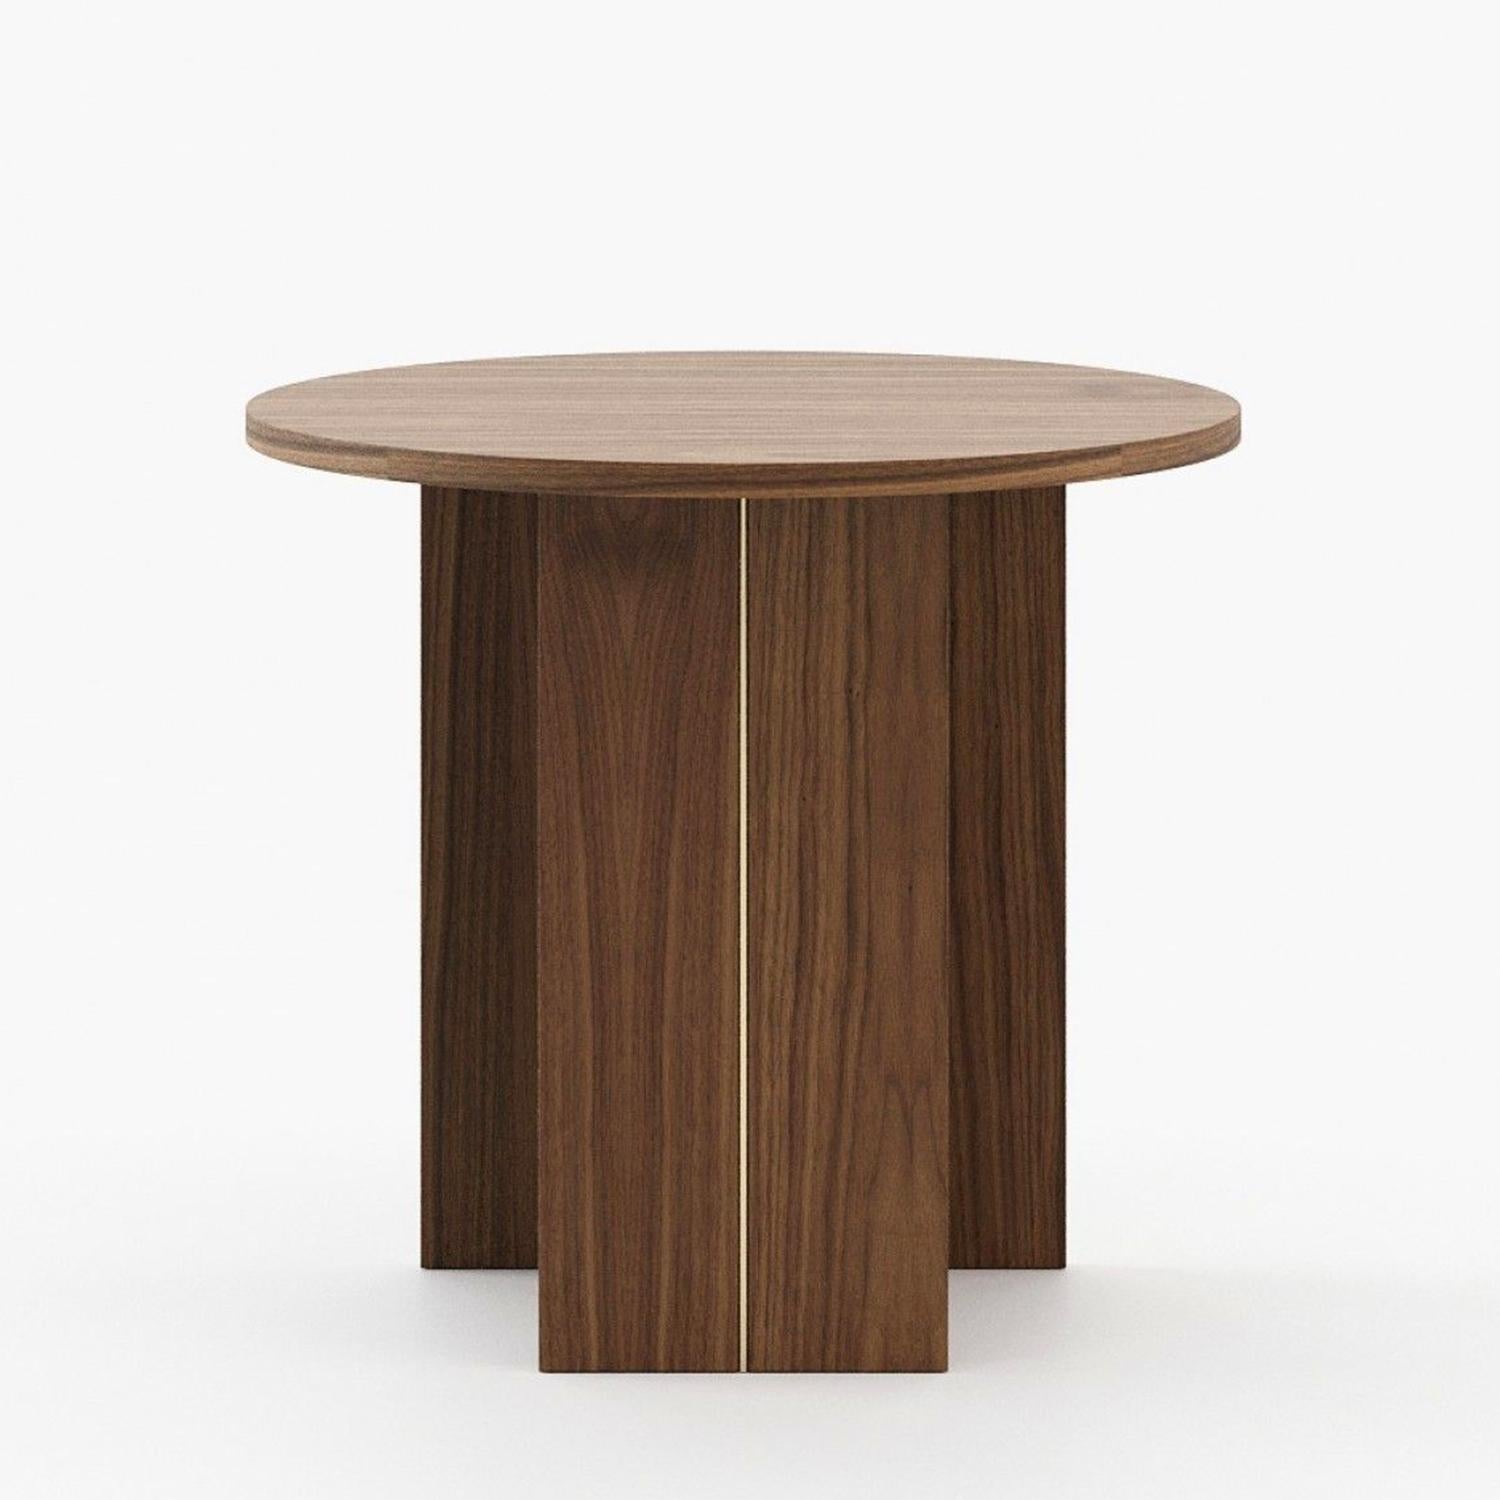 Side Table Ania with all structure in walnut wood veneered
with polished stainless steel trim in gold finish.
Also available on request in grey oak matte, or in natural oak, or in
ebony matte finish.